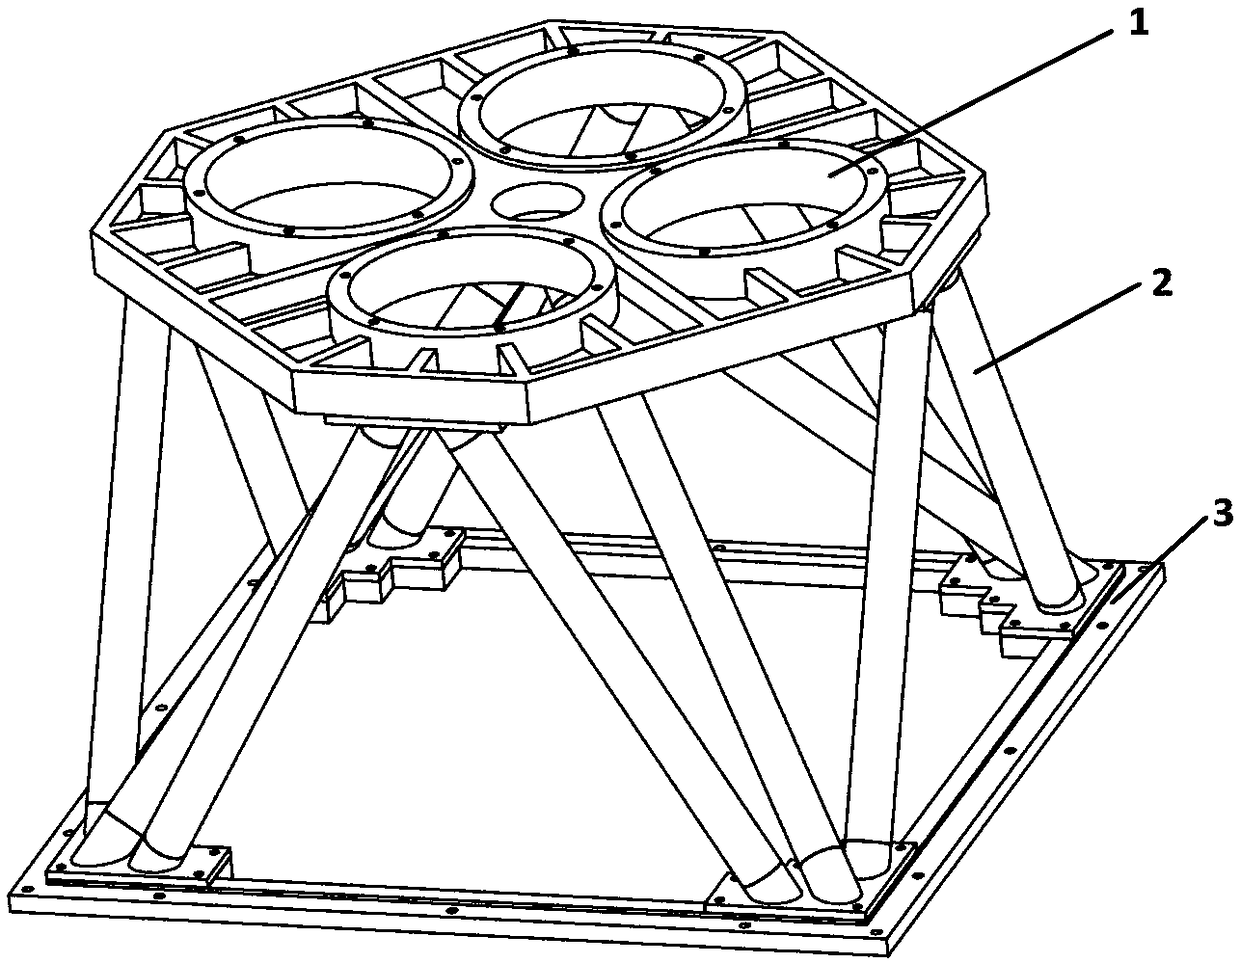 Truss type supporting structure of space wide camera